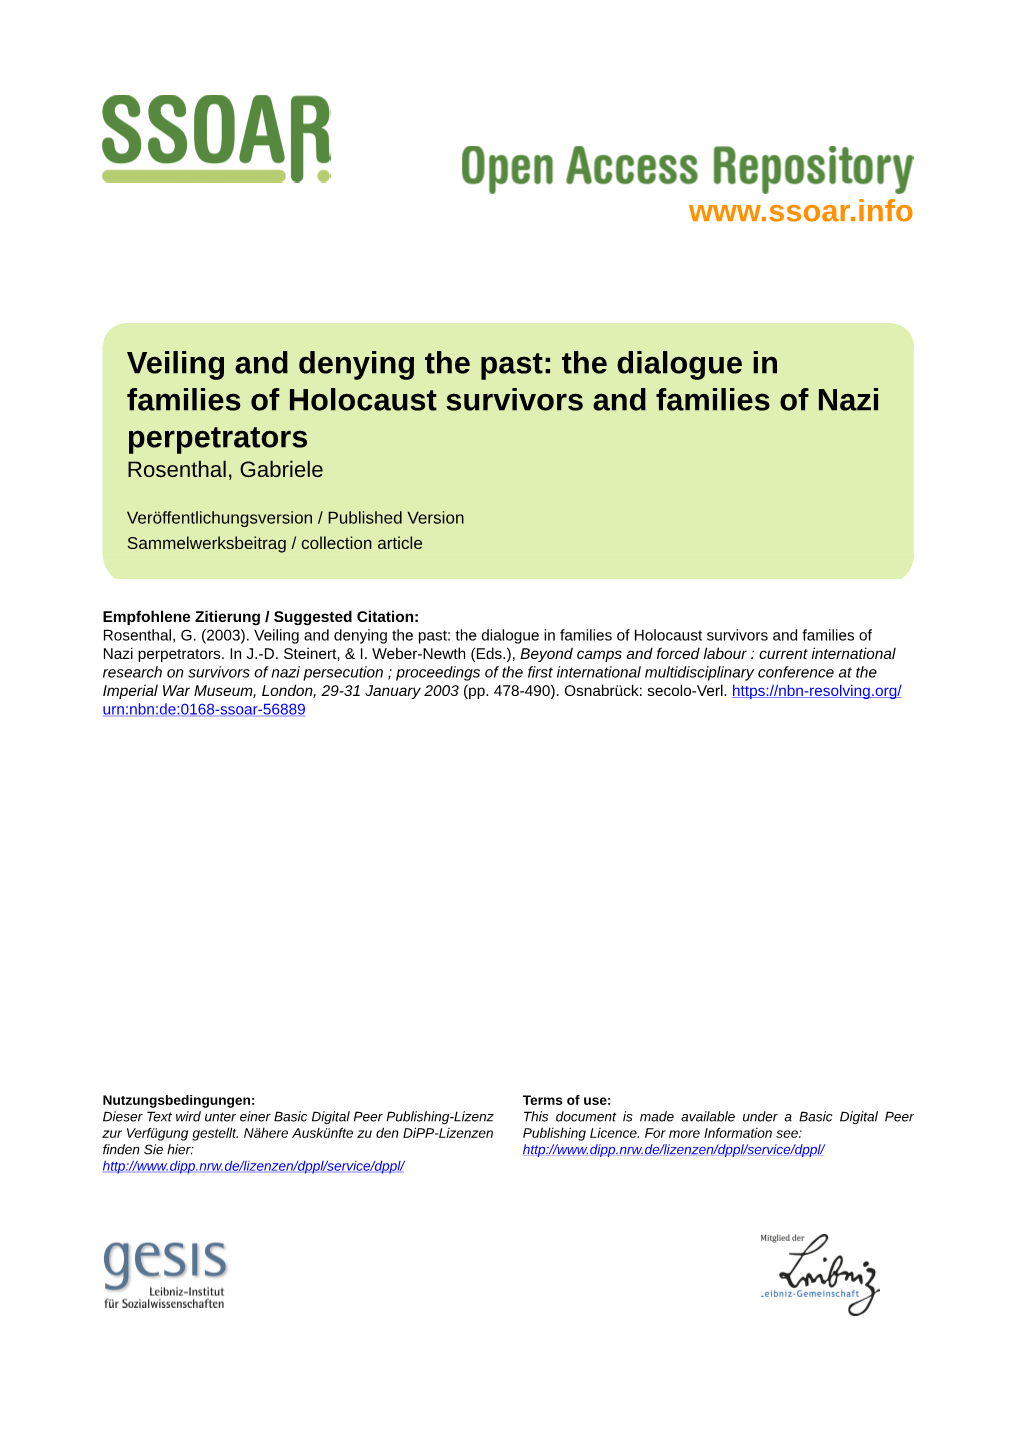 Veiling and Denying the Past: the Dialogue in Families of Holocaust Survivors and Families of Nazi Perpetrators Rosenthal, Gabriele